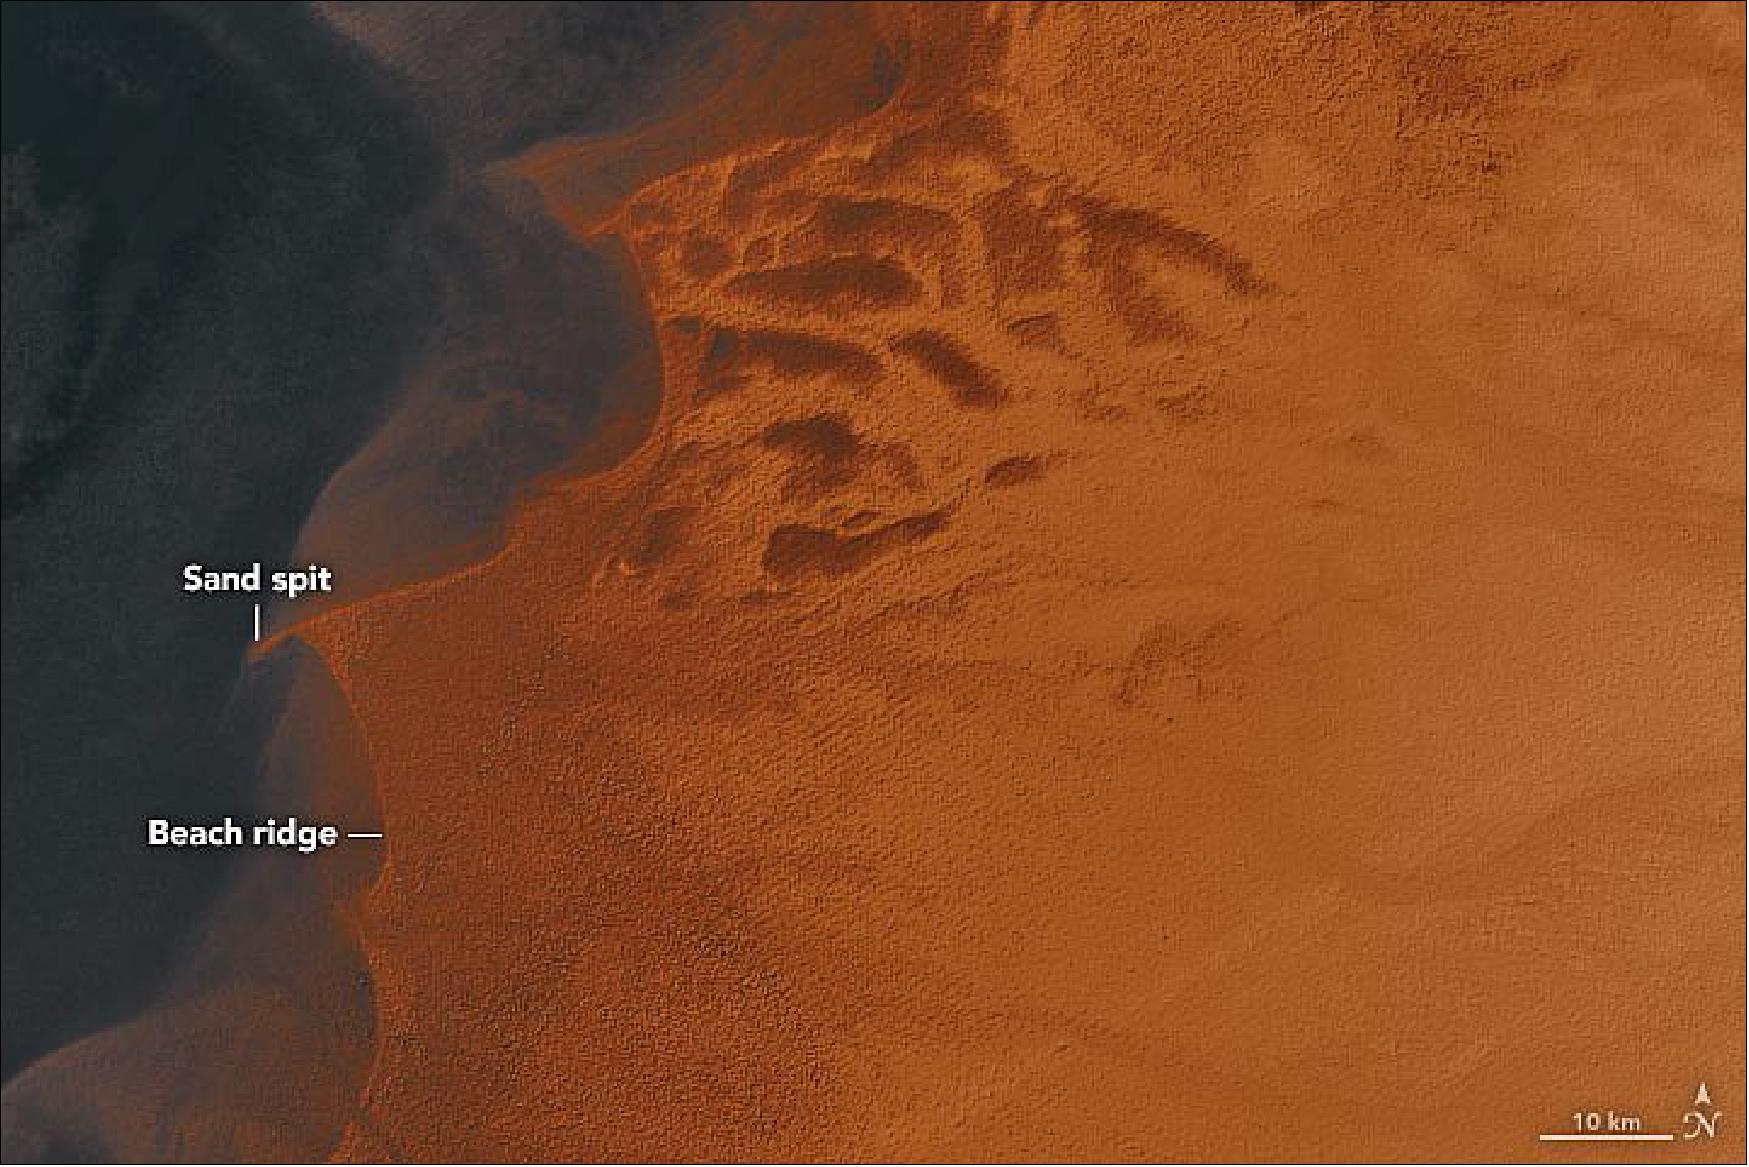 Figure 119: Detail image of the Space Shuttle SRTM mission in February 2000 showing the ancient short line of Lake Chad. The spits etched into a desert in Chad were actually formed thousands of years ago along the shores of a vast lake (image credit: NASA Earth Observatory, image by Joshua Stevens, using topographic data from the Shuttle Radar Topography Mission (SRTM))